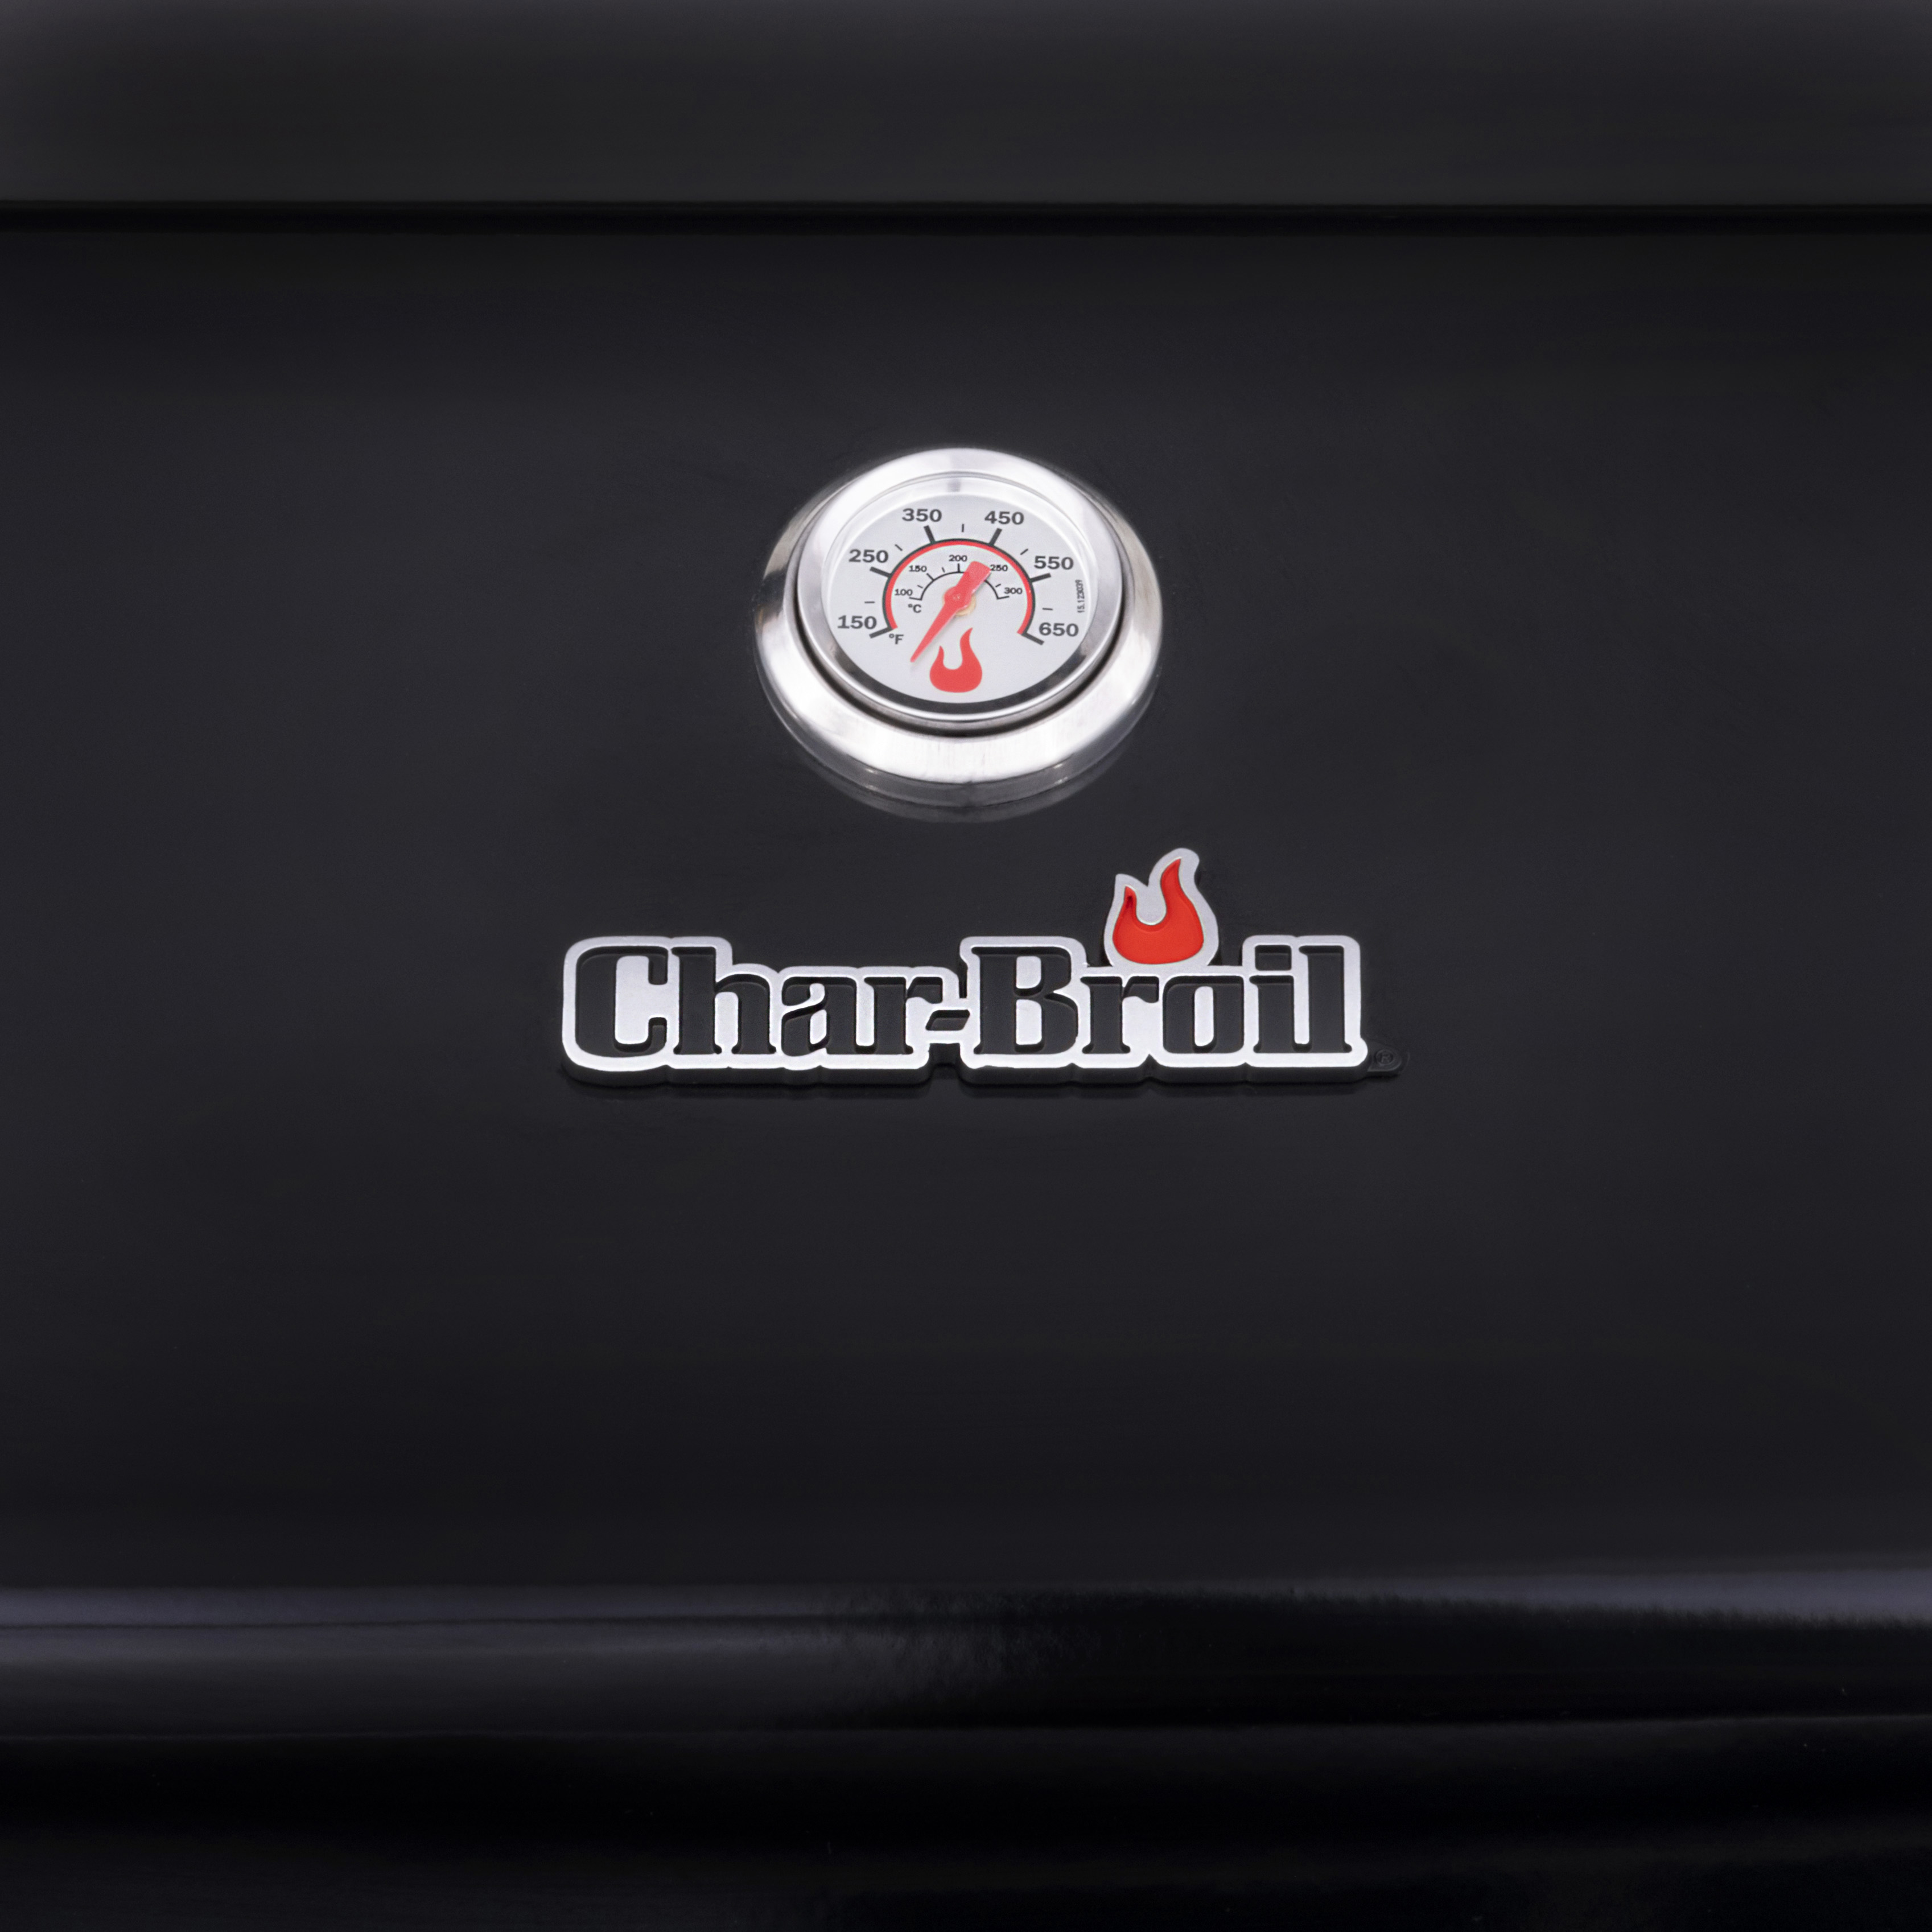 Char-Broil Performance 4-Burner Liquid Propane, Cart-Style Outdoor Gas Grill- Black - image 4 of 9